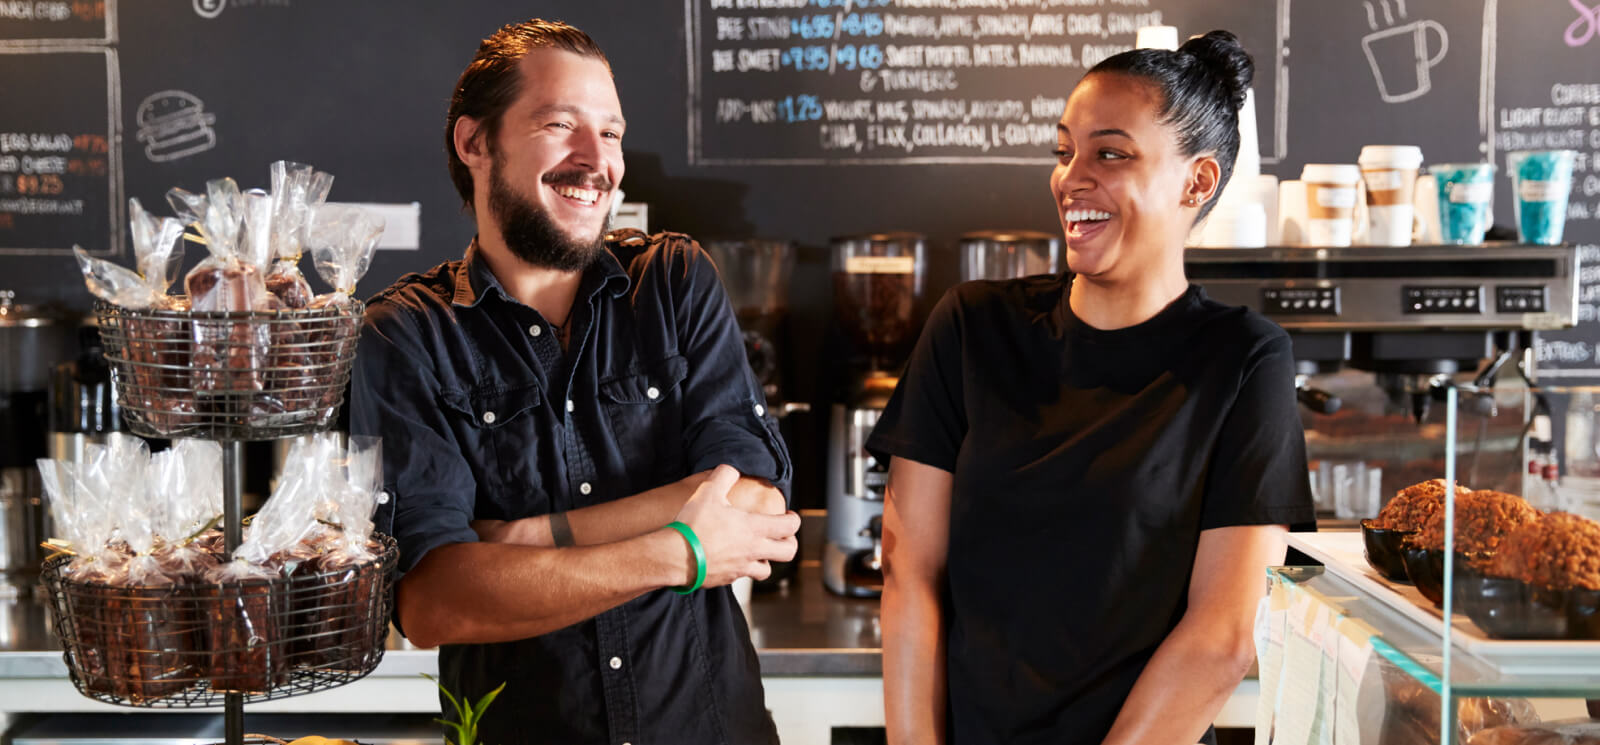 Two workers at a cafe laughing